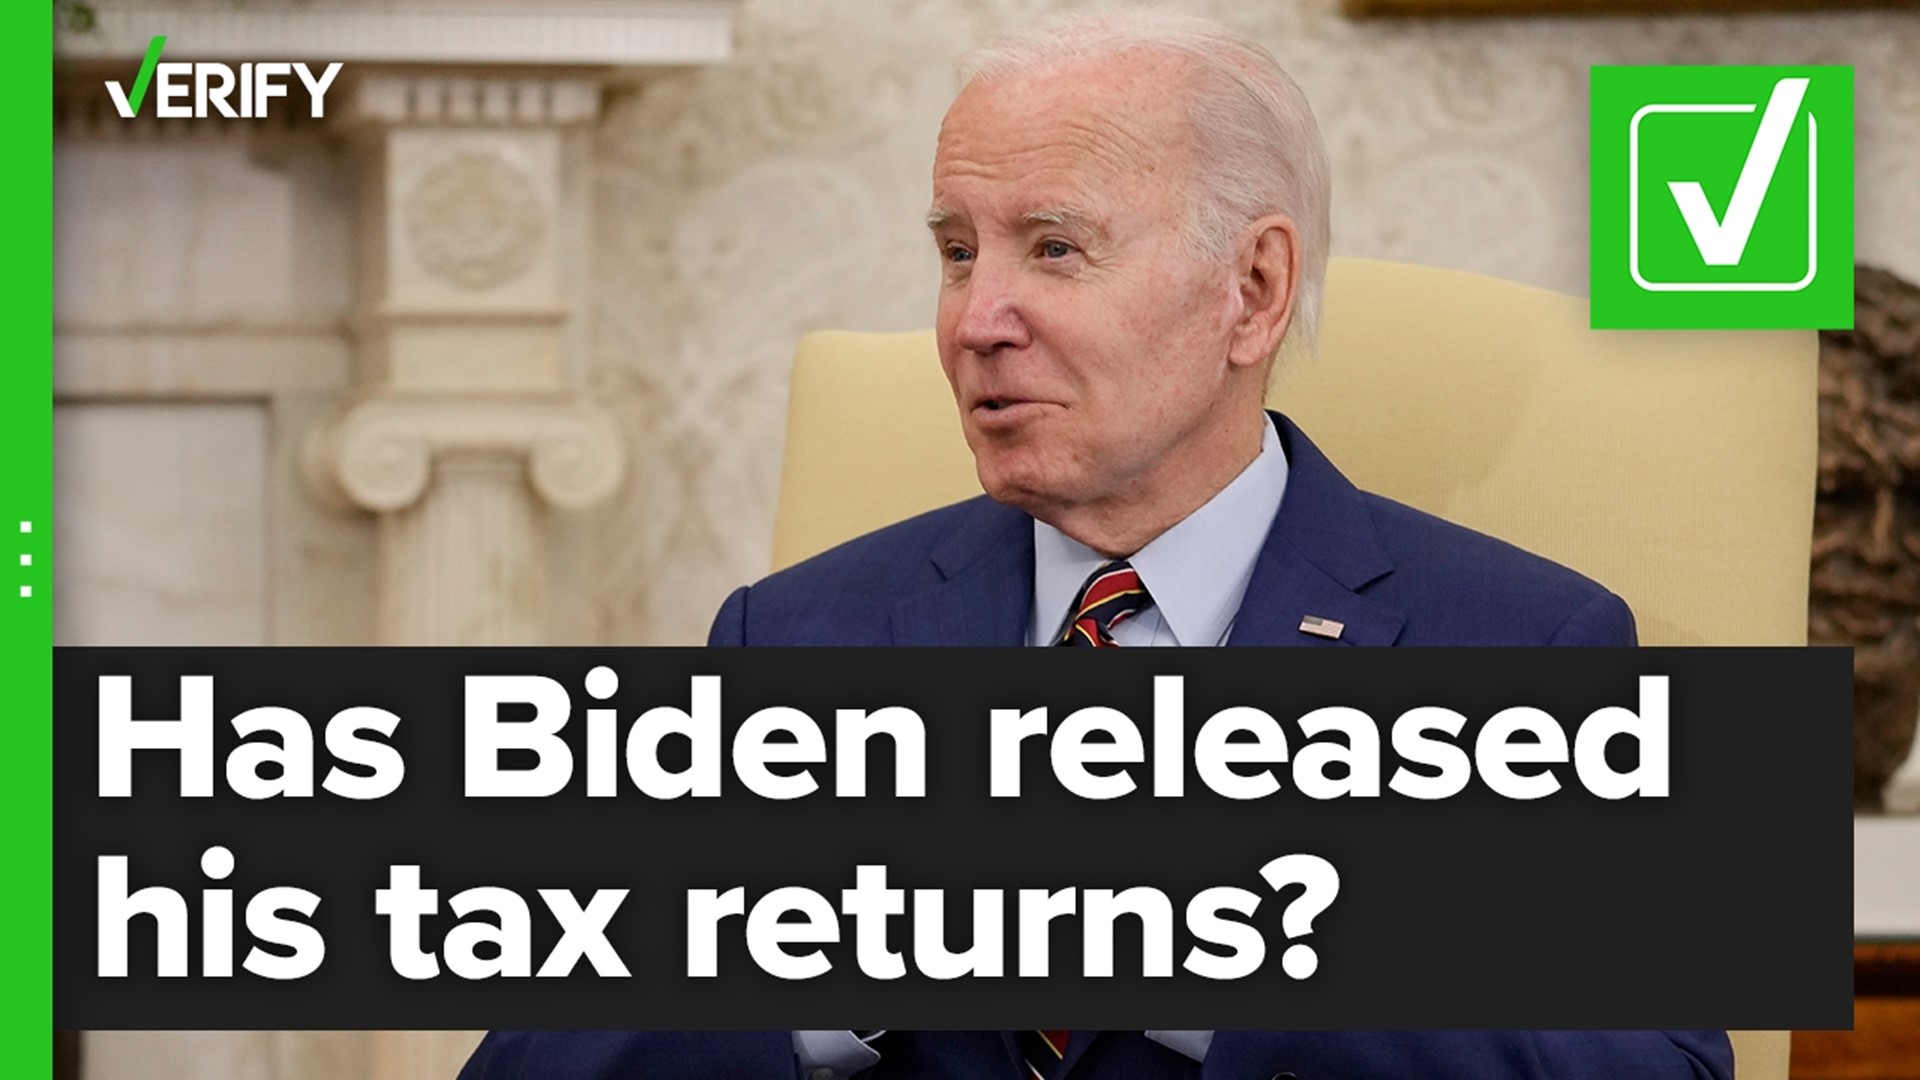 Biden resumed the tradition – broken by President Trump – of publicly releasing tax returns annually.